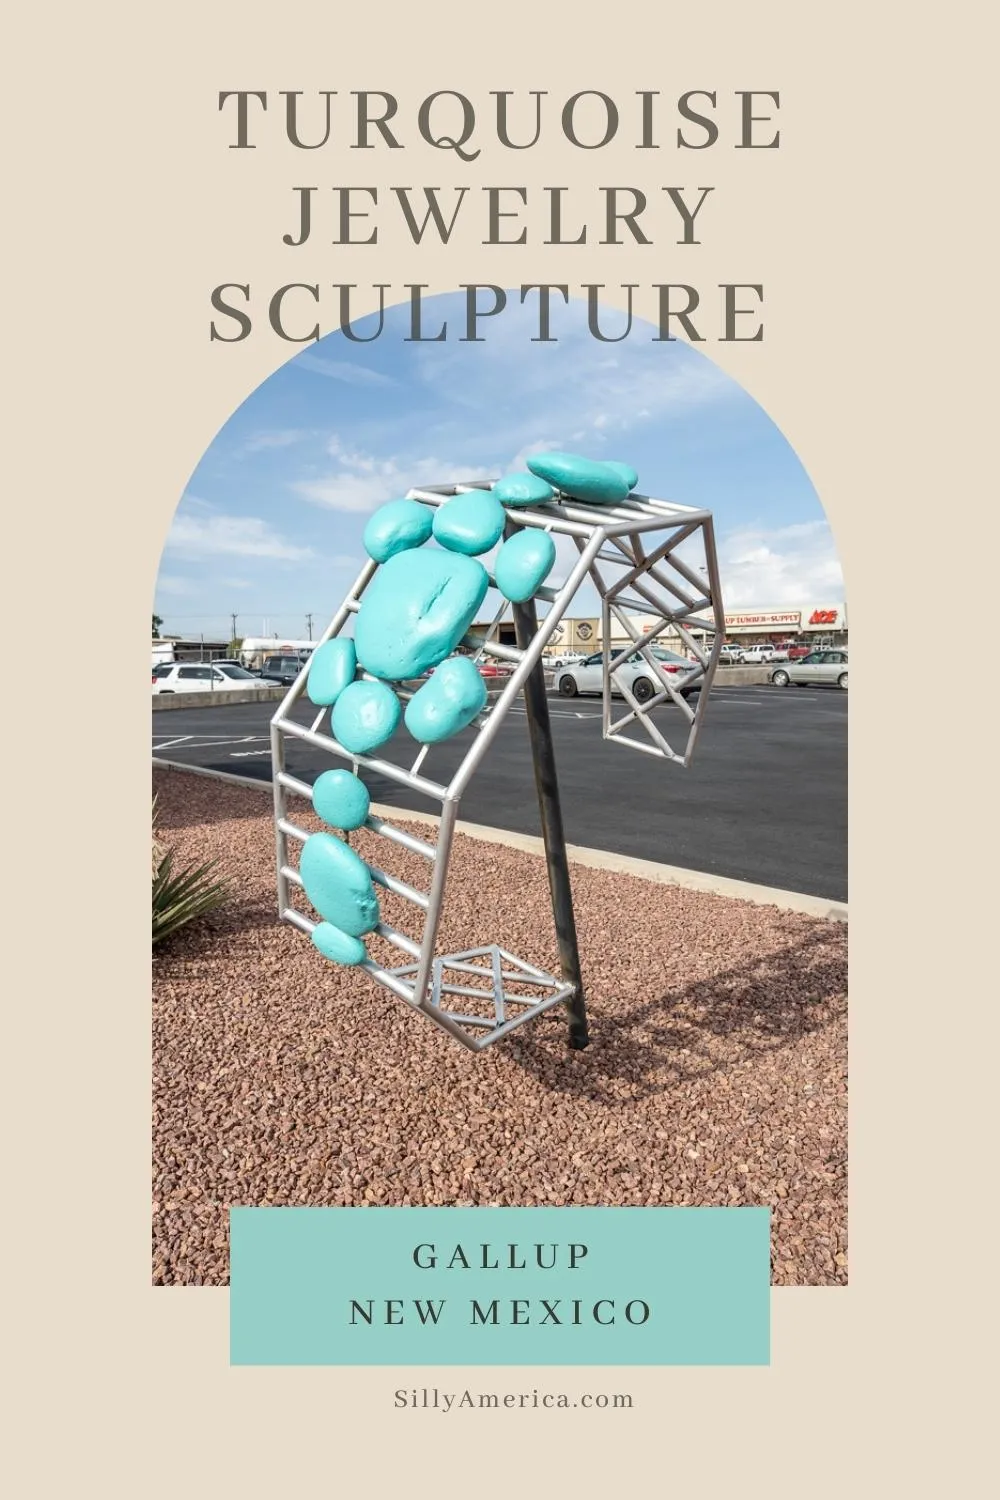 Find this Giant Turquoise Jewelry Sculpture at Perry Null Trading Company in Gallup, New Mexico. The giant turquoise bracelet is found in front of Perry Null Trading Company, a shop in Gallup, New Mexico that sells Native American jewelry, arts, and crafts. They specialize in silver and turquoise jewelry, pottery, carvings, and rugs. Visit on a Route 66 road trip through New Mexico and add this fun roadside attraction to your travel itinerary! #Route66 #RoadTrip #RoadsideAttraction #NewMexico